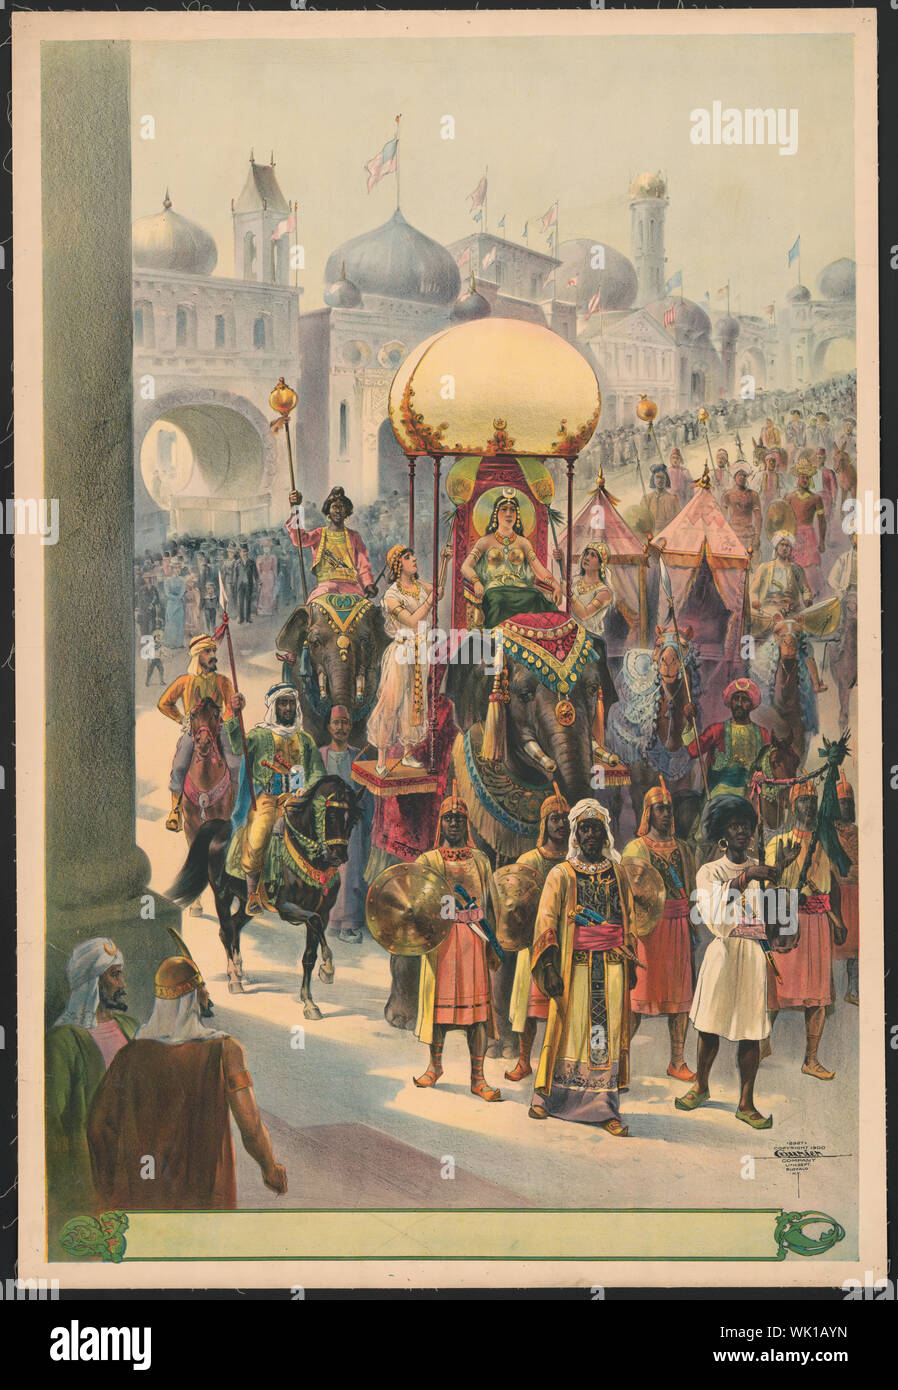 Indian parade with queen riding elephant Stock Photo